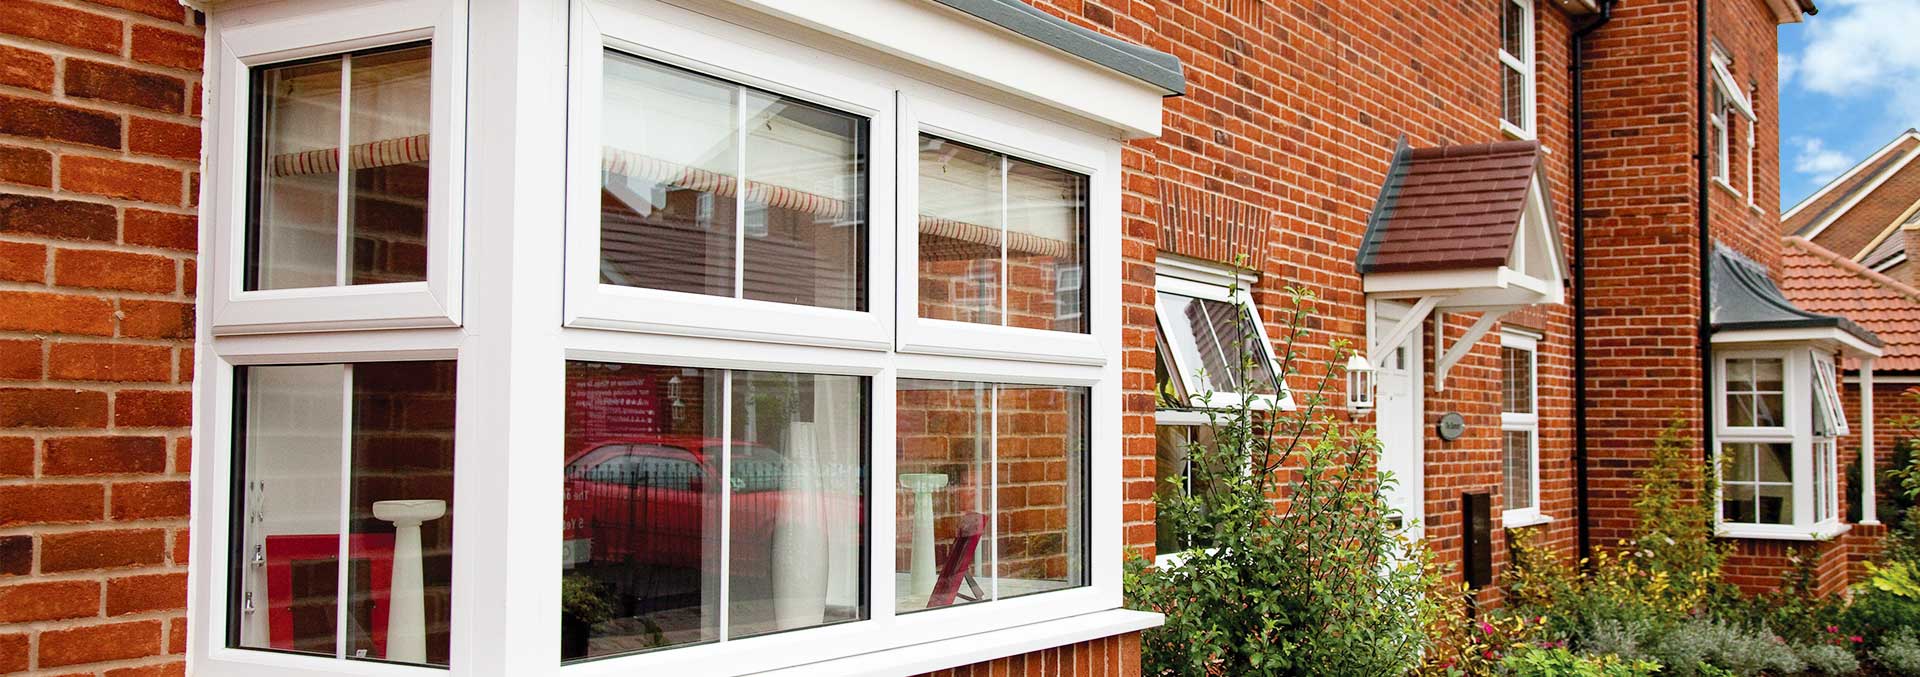 Windows in white uPVC in bay configuration which utilise double glazing